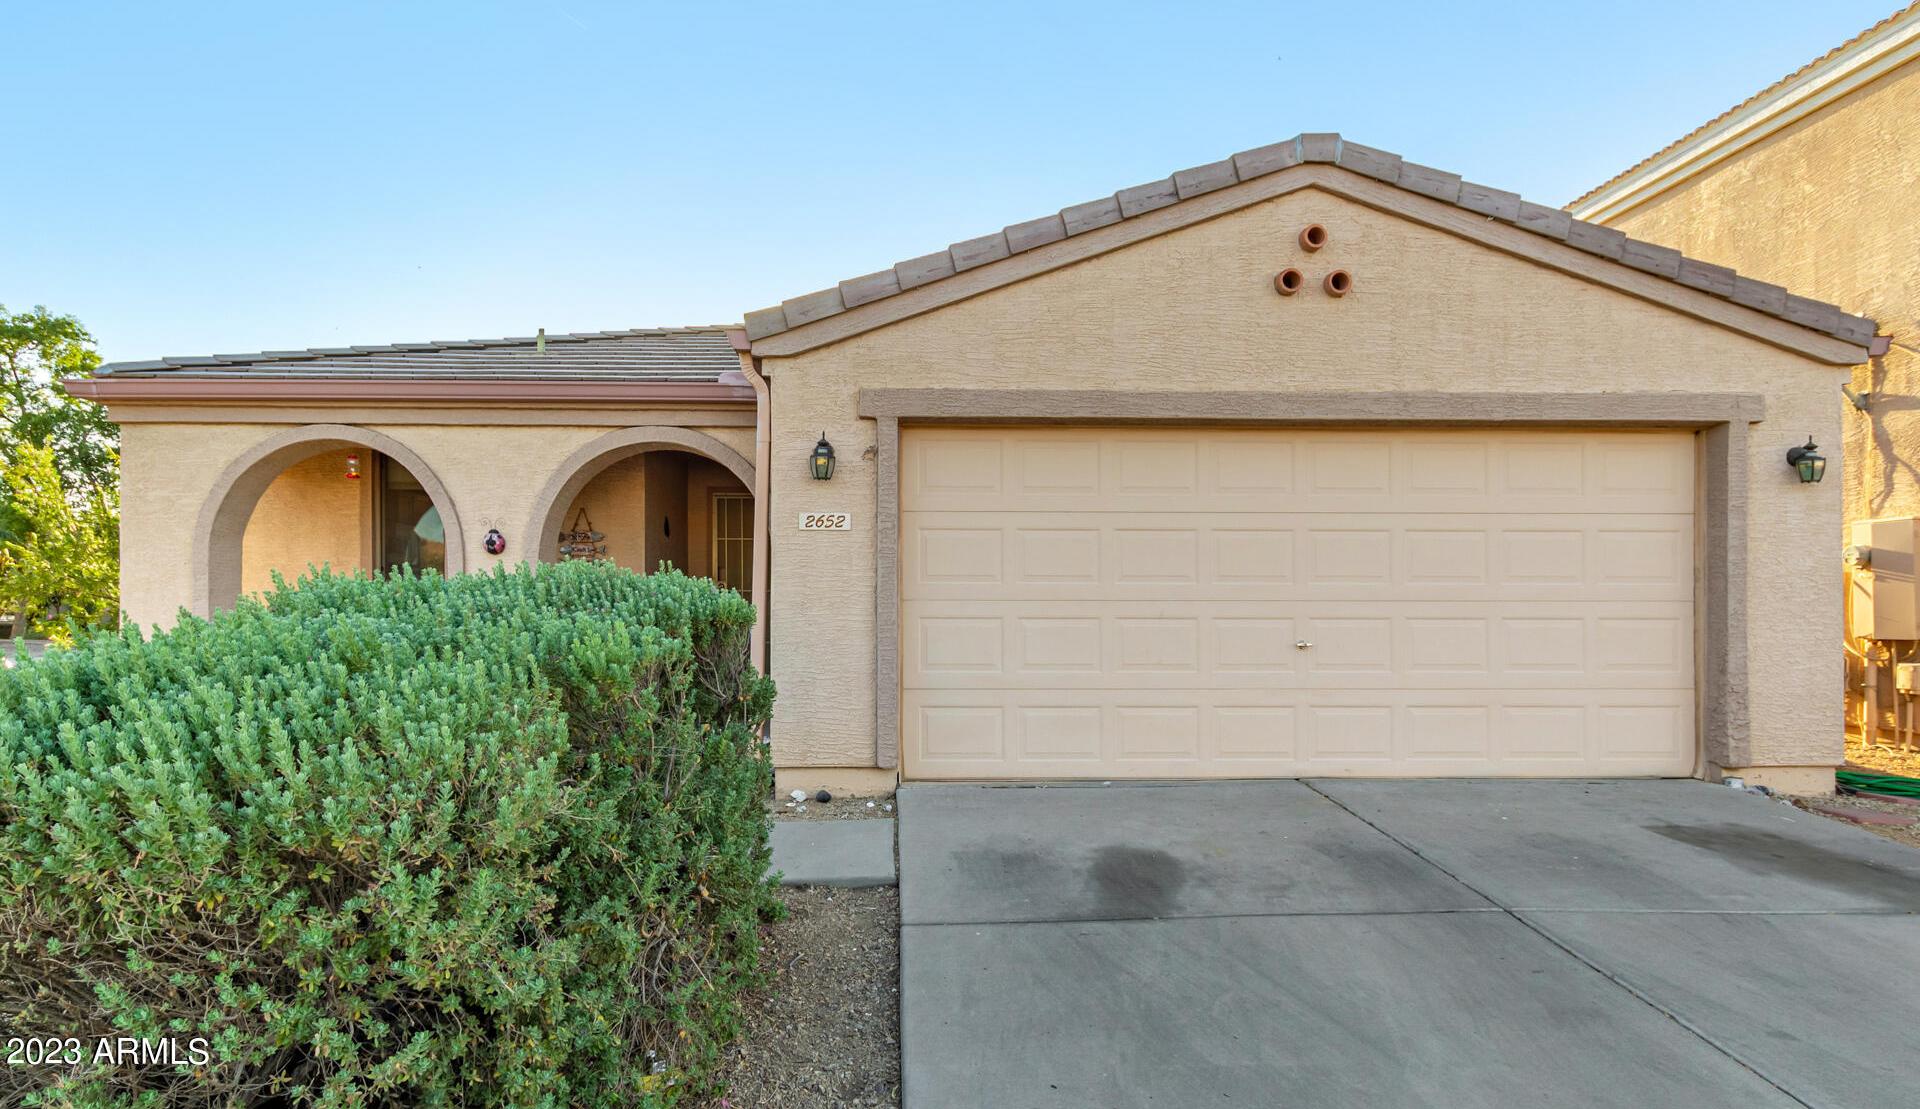 Photo one of 2652 S 84Th Gln Tolleson AZ 85353 | MLS 6618323